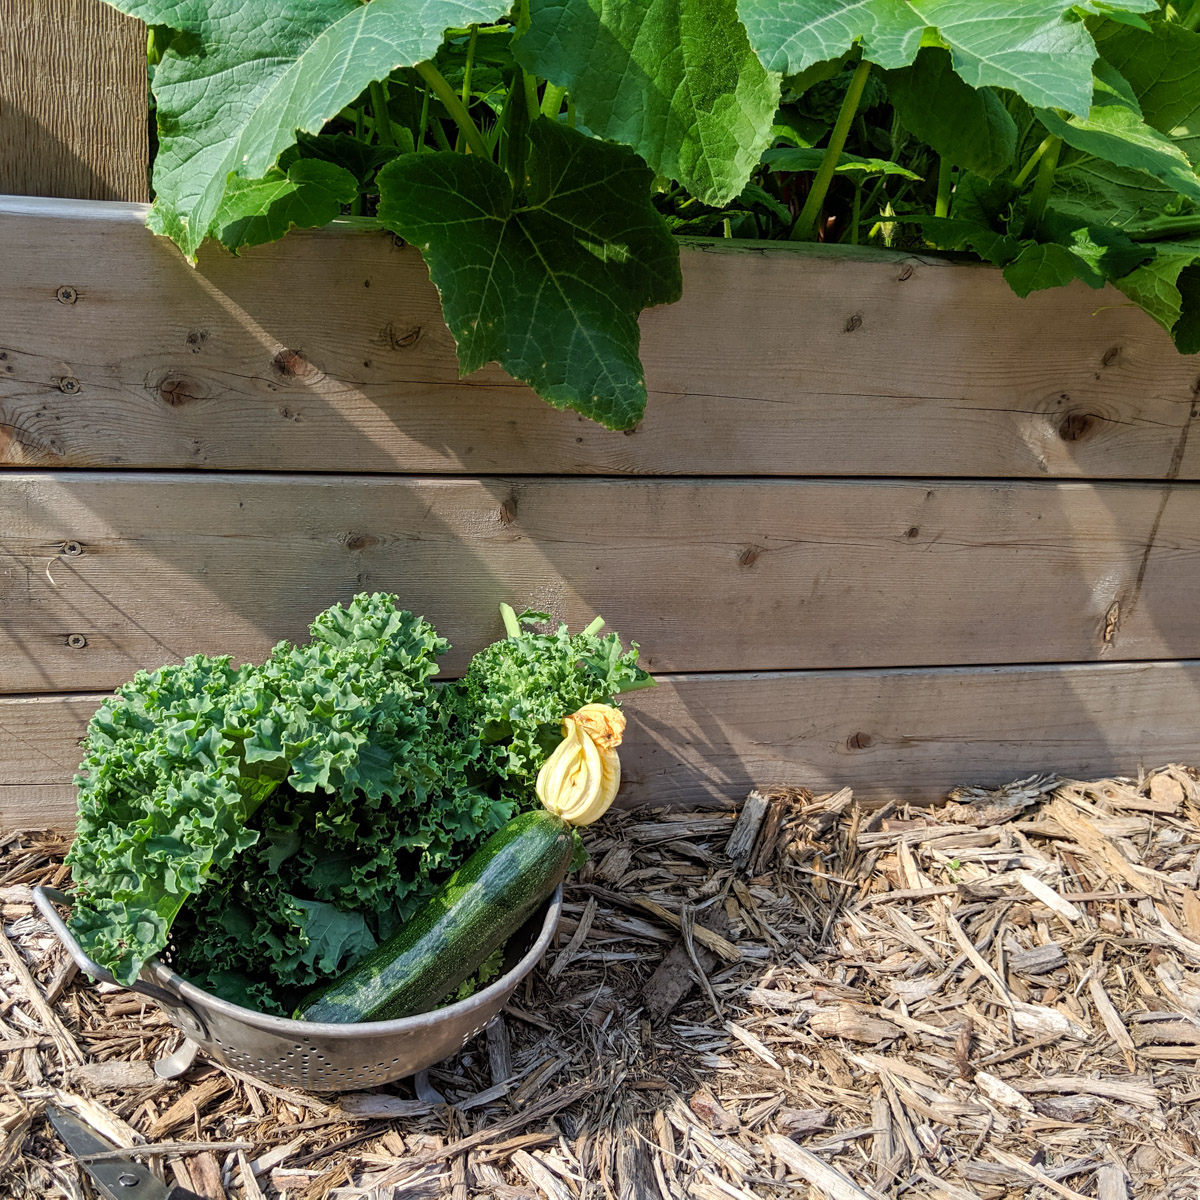 A bowl of harvested kale and zucchini from the garden in front of a raised bed.